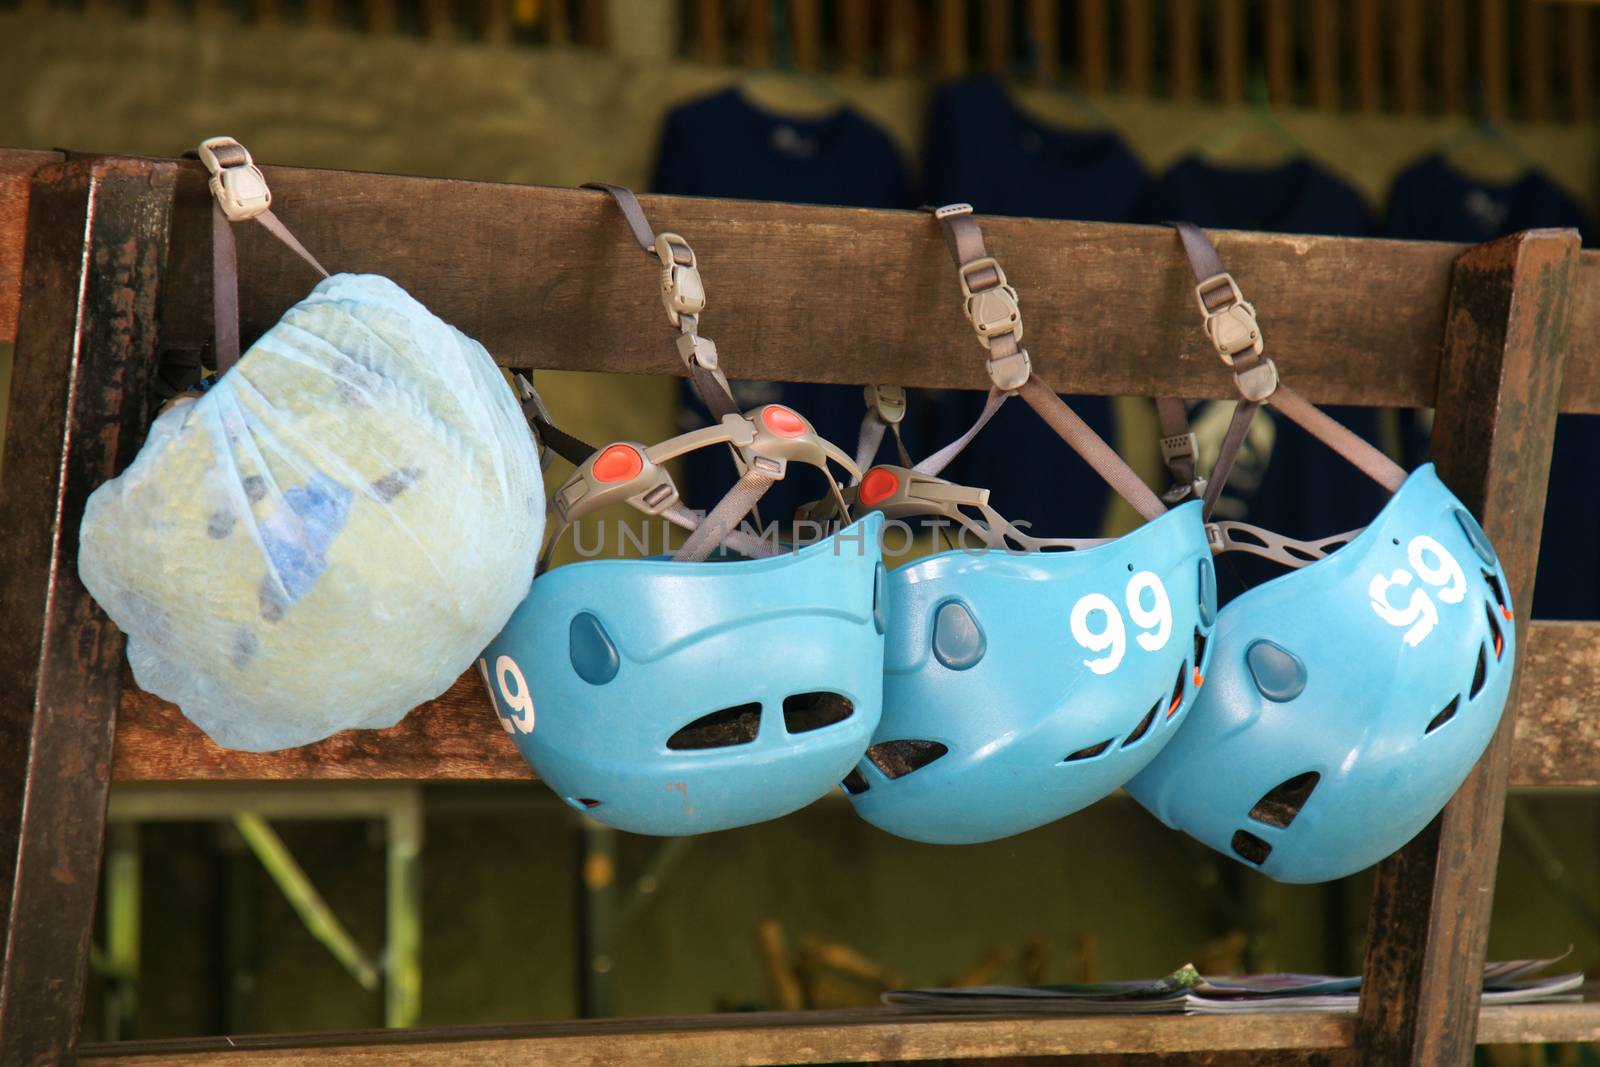 Group of safety helmets for zipline jungle adventure extreme sports hang on the wooden terrace